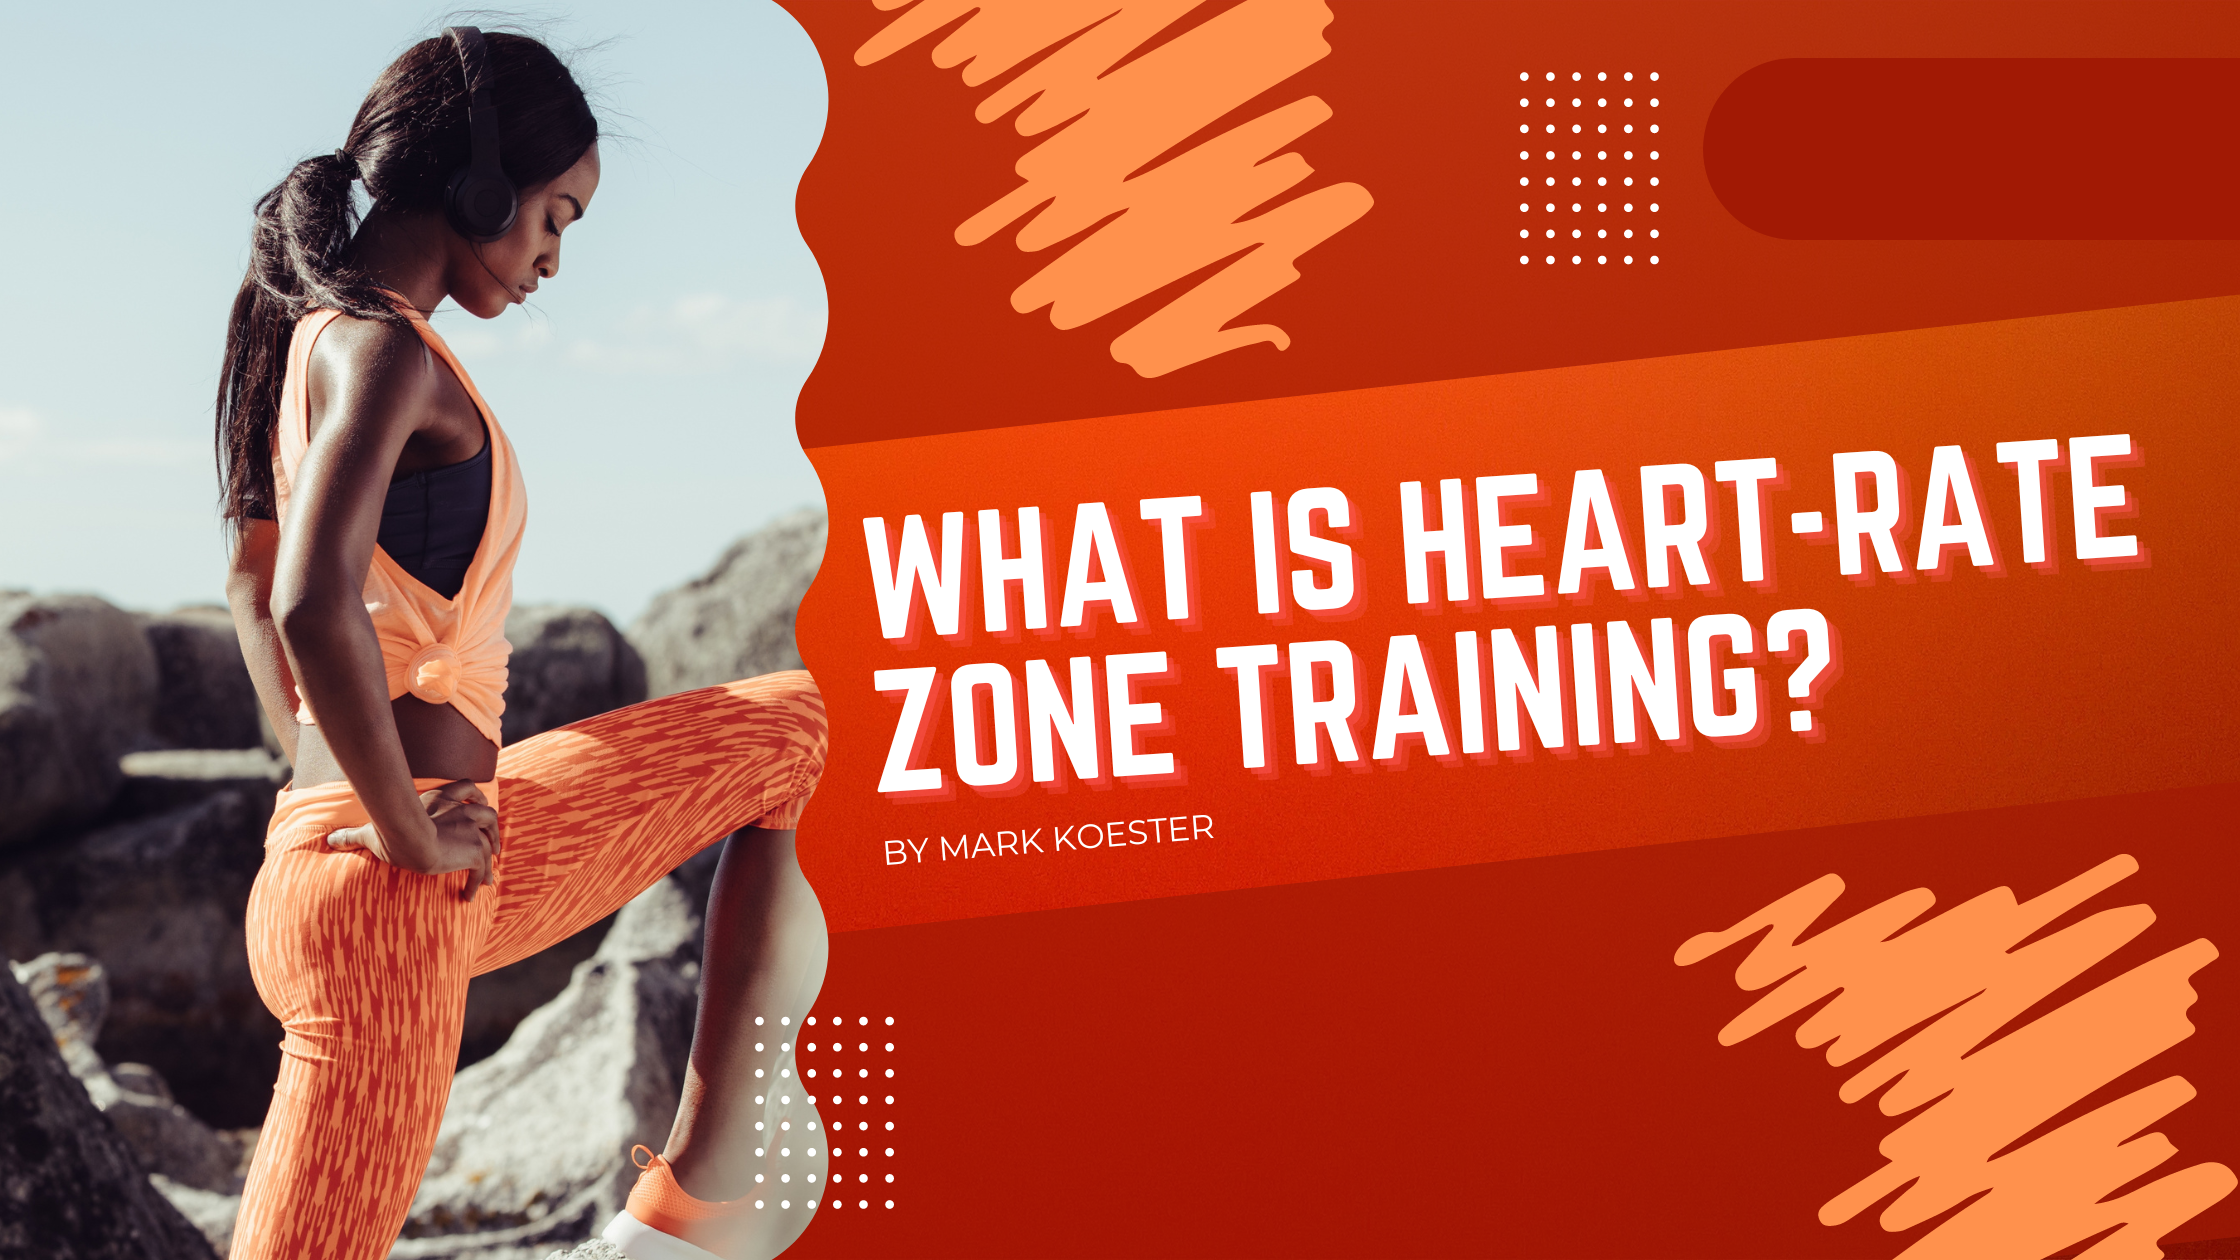 WHAT IS HEART-RATE ZONE TRAINING?